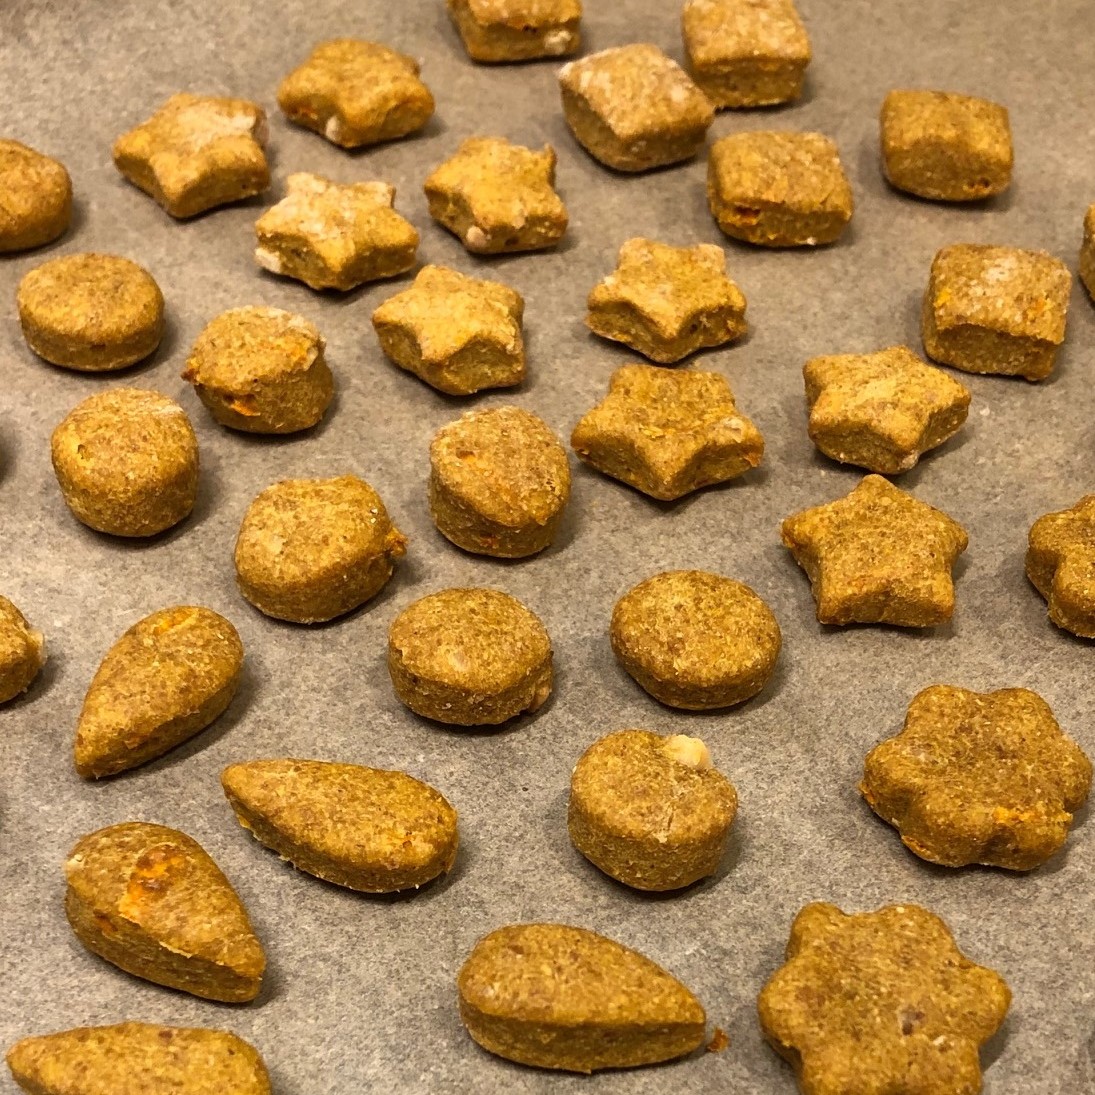 Peanut Butter and Carrot Dog Treats